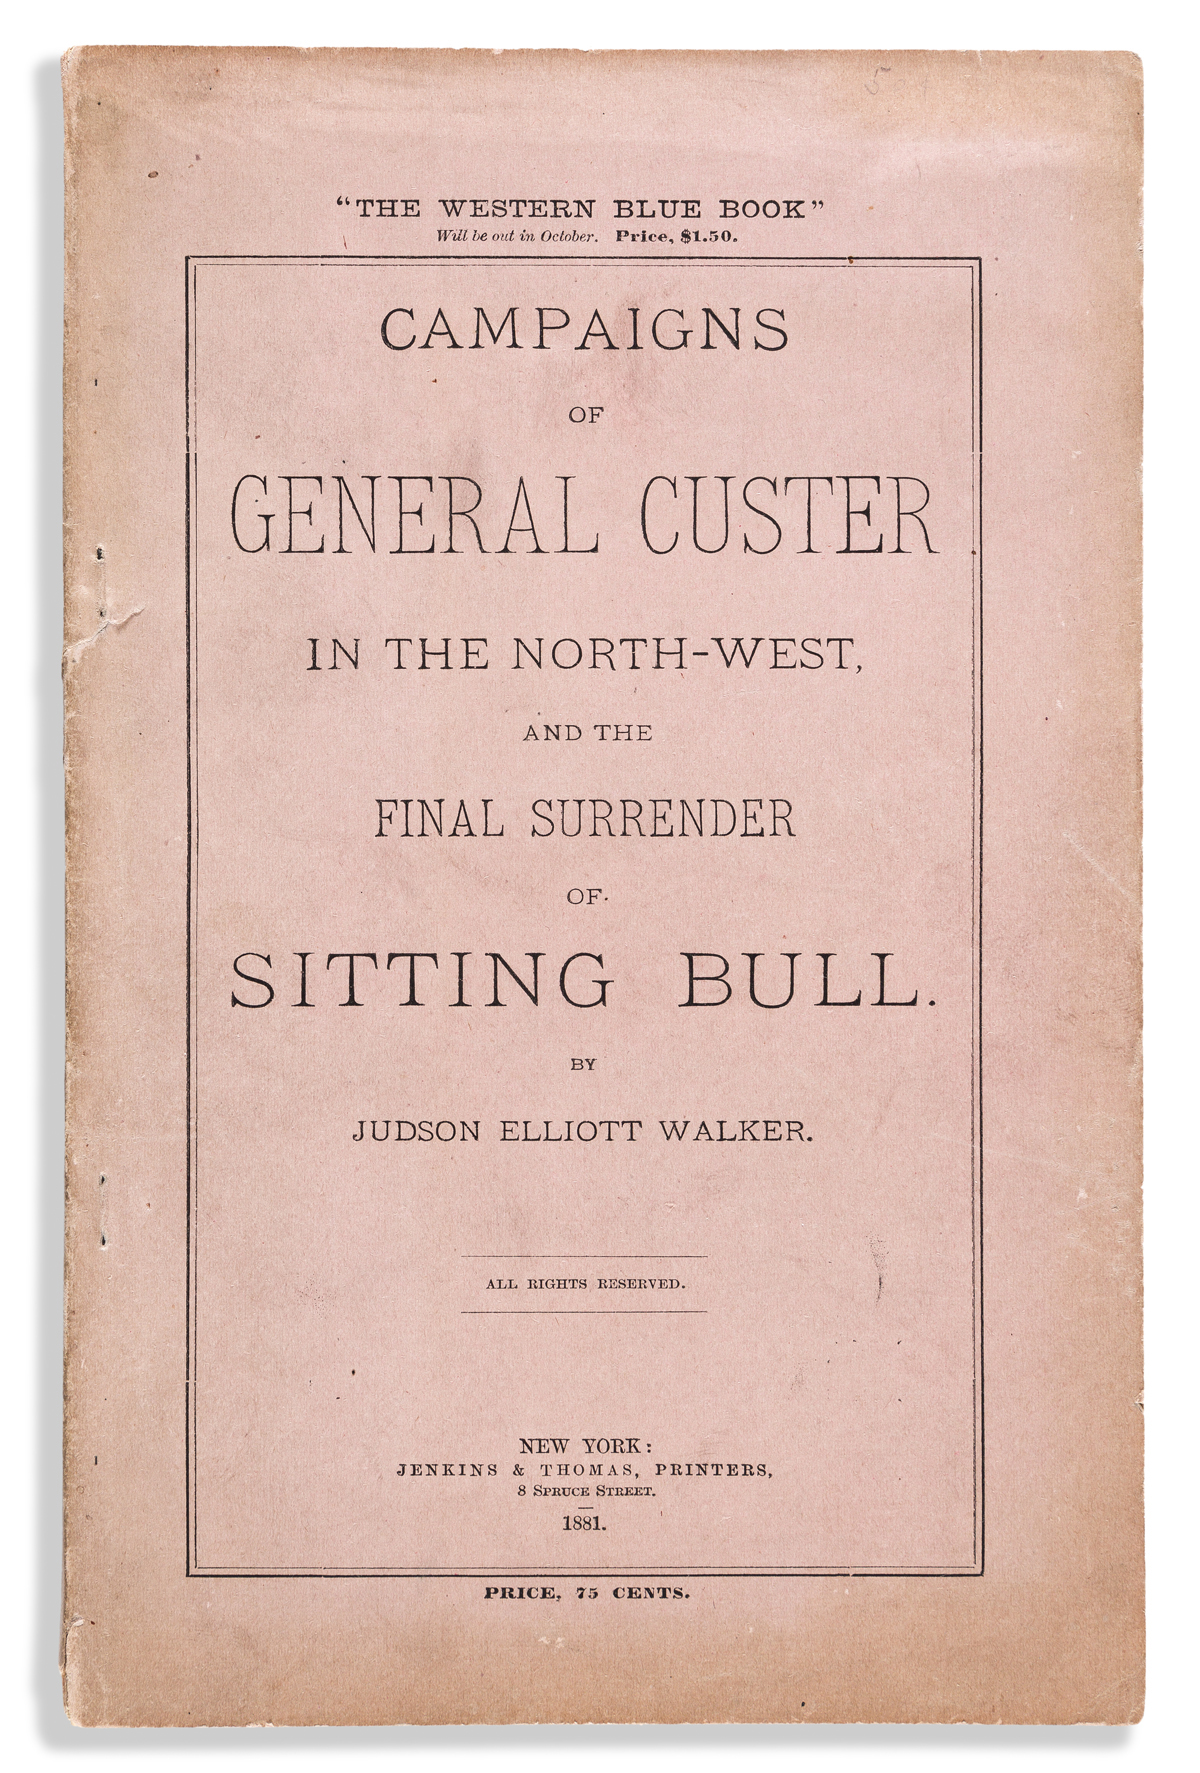 (GEORGE A. CUSTER.) Judson Elliott Walker. Campaigns of General Custer in the North-West, and the Final Surrender of Sitting Bull.